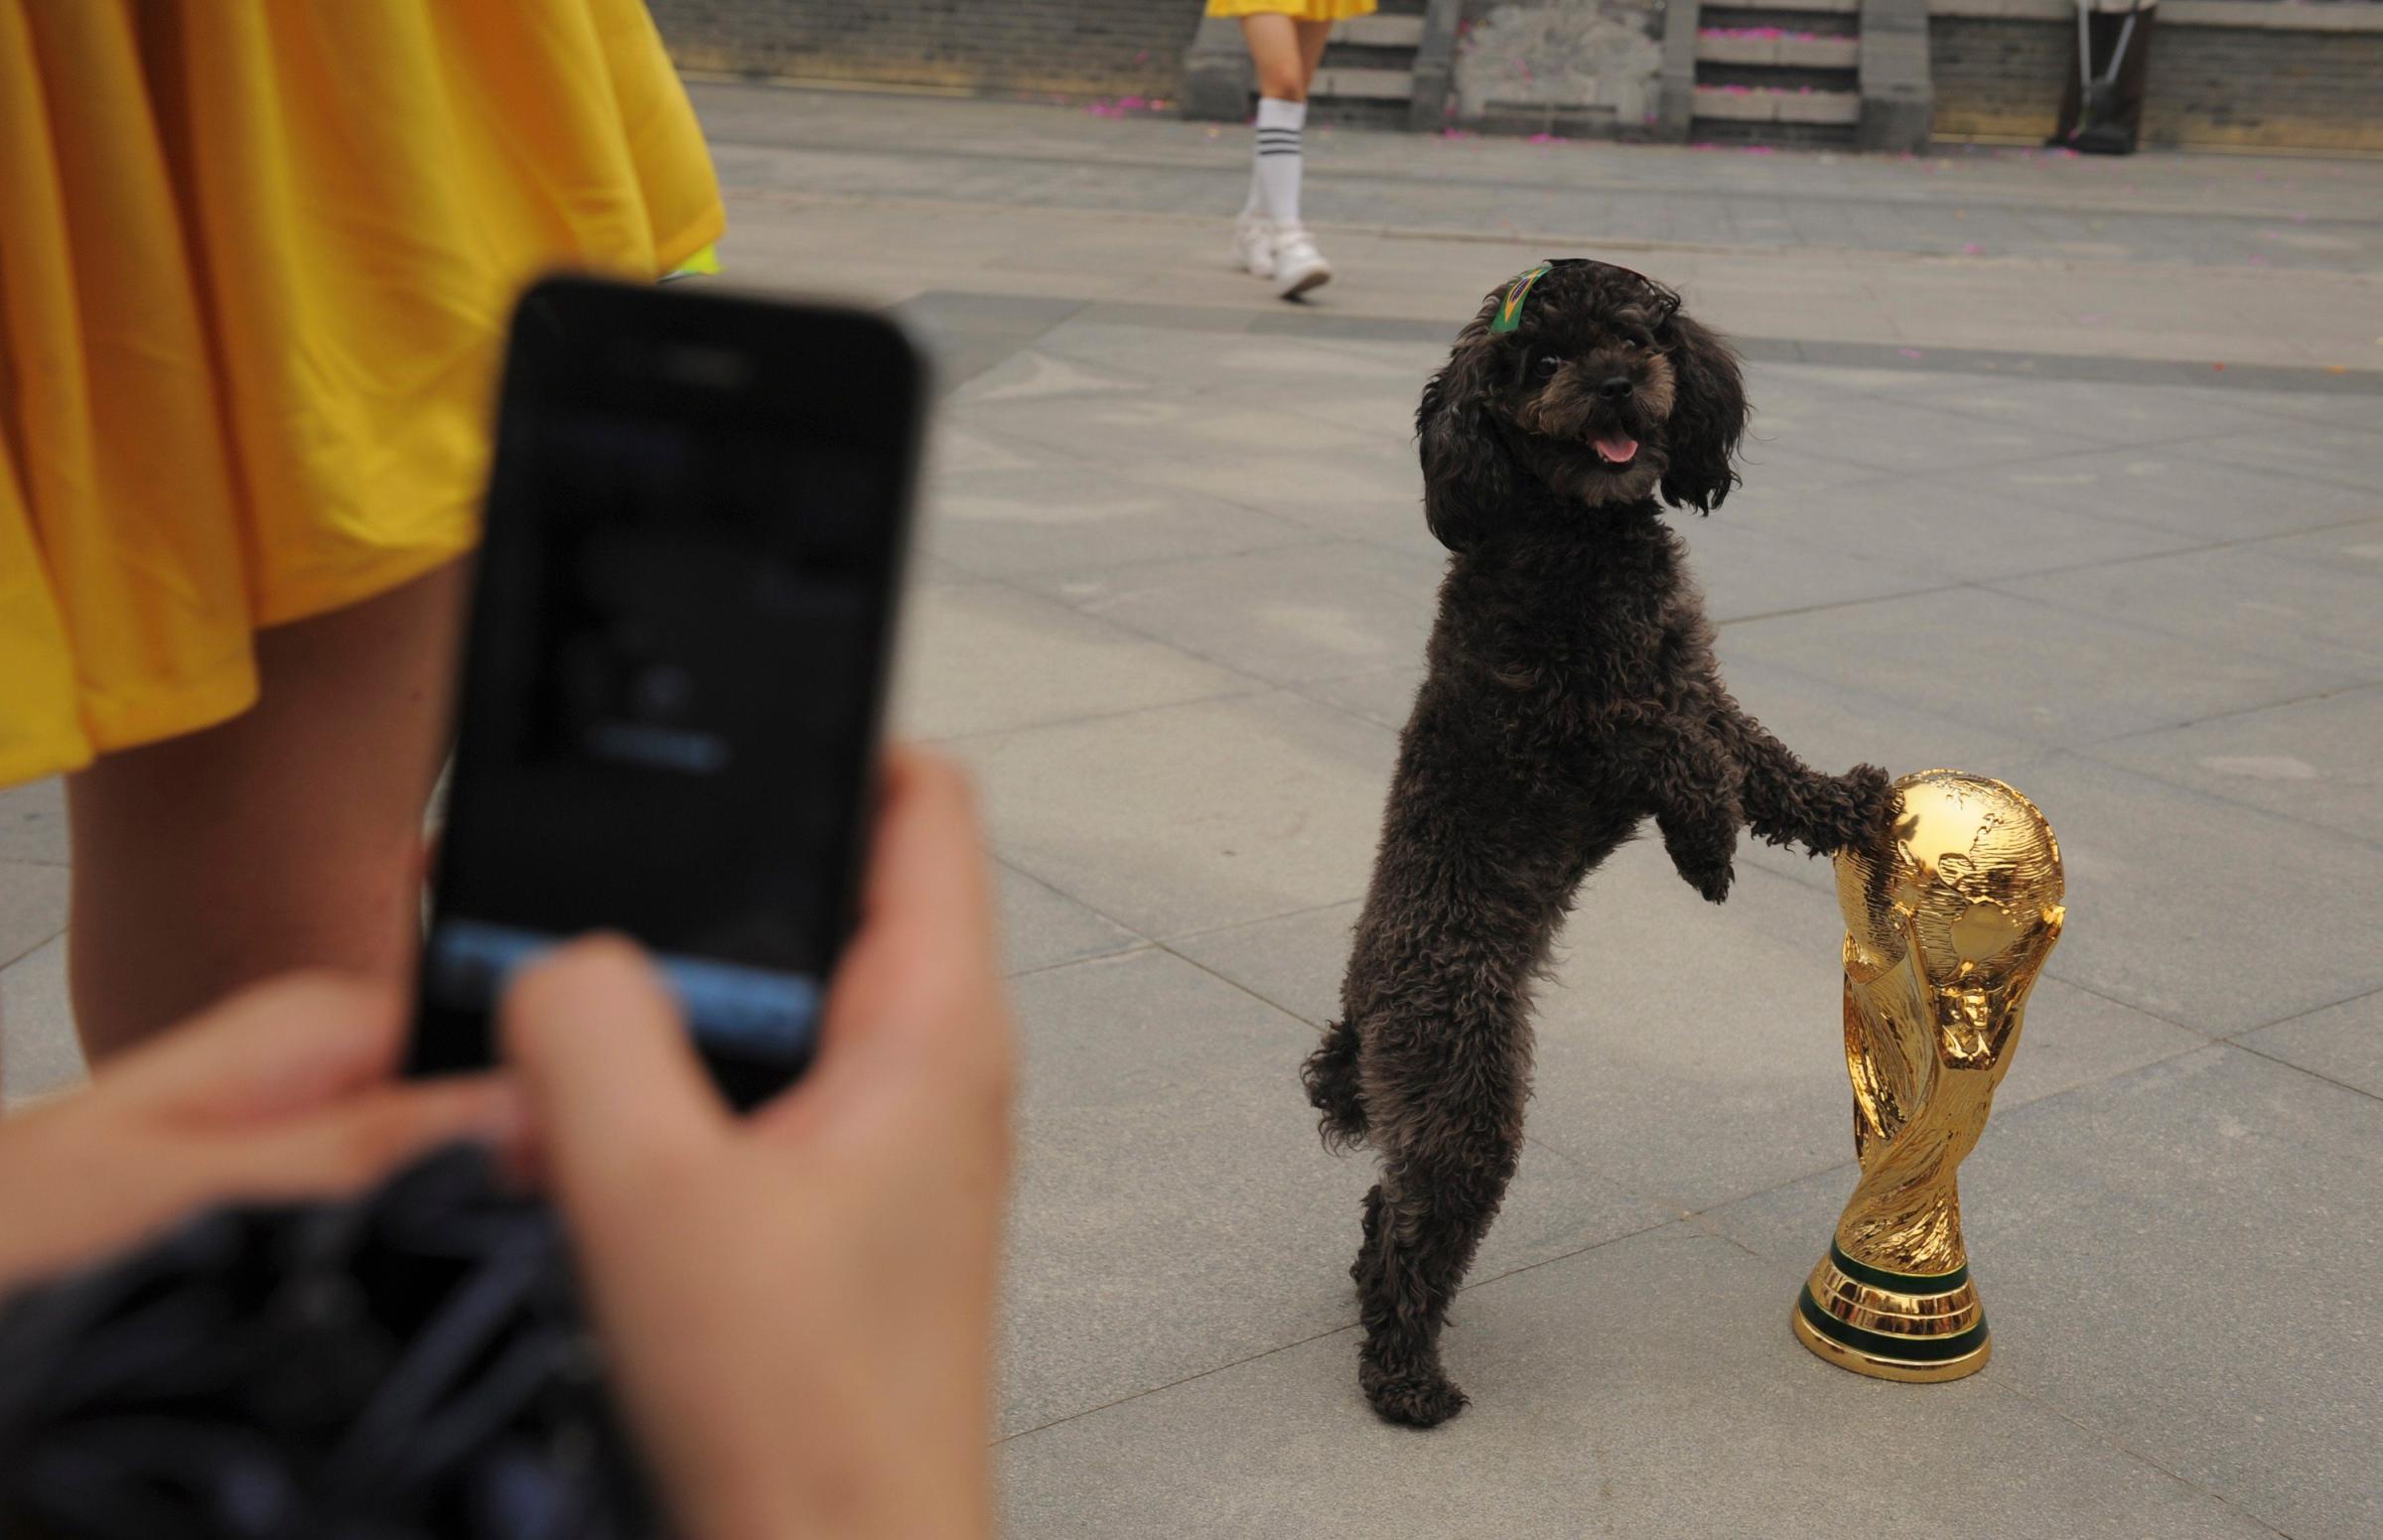 A dog with a Brazilian flag sticker on its head, touches a replica of the World Cup trophy as a visitor takes pictures during an event to celebrate the upcoming 2014 World Cup in Brazil, in Wuhan, Hubei province, China on June 12, 2014.